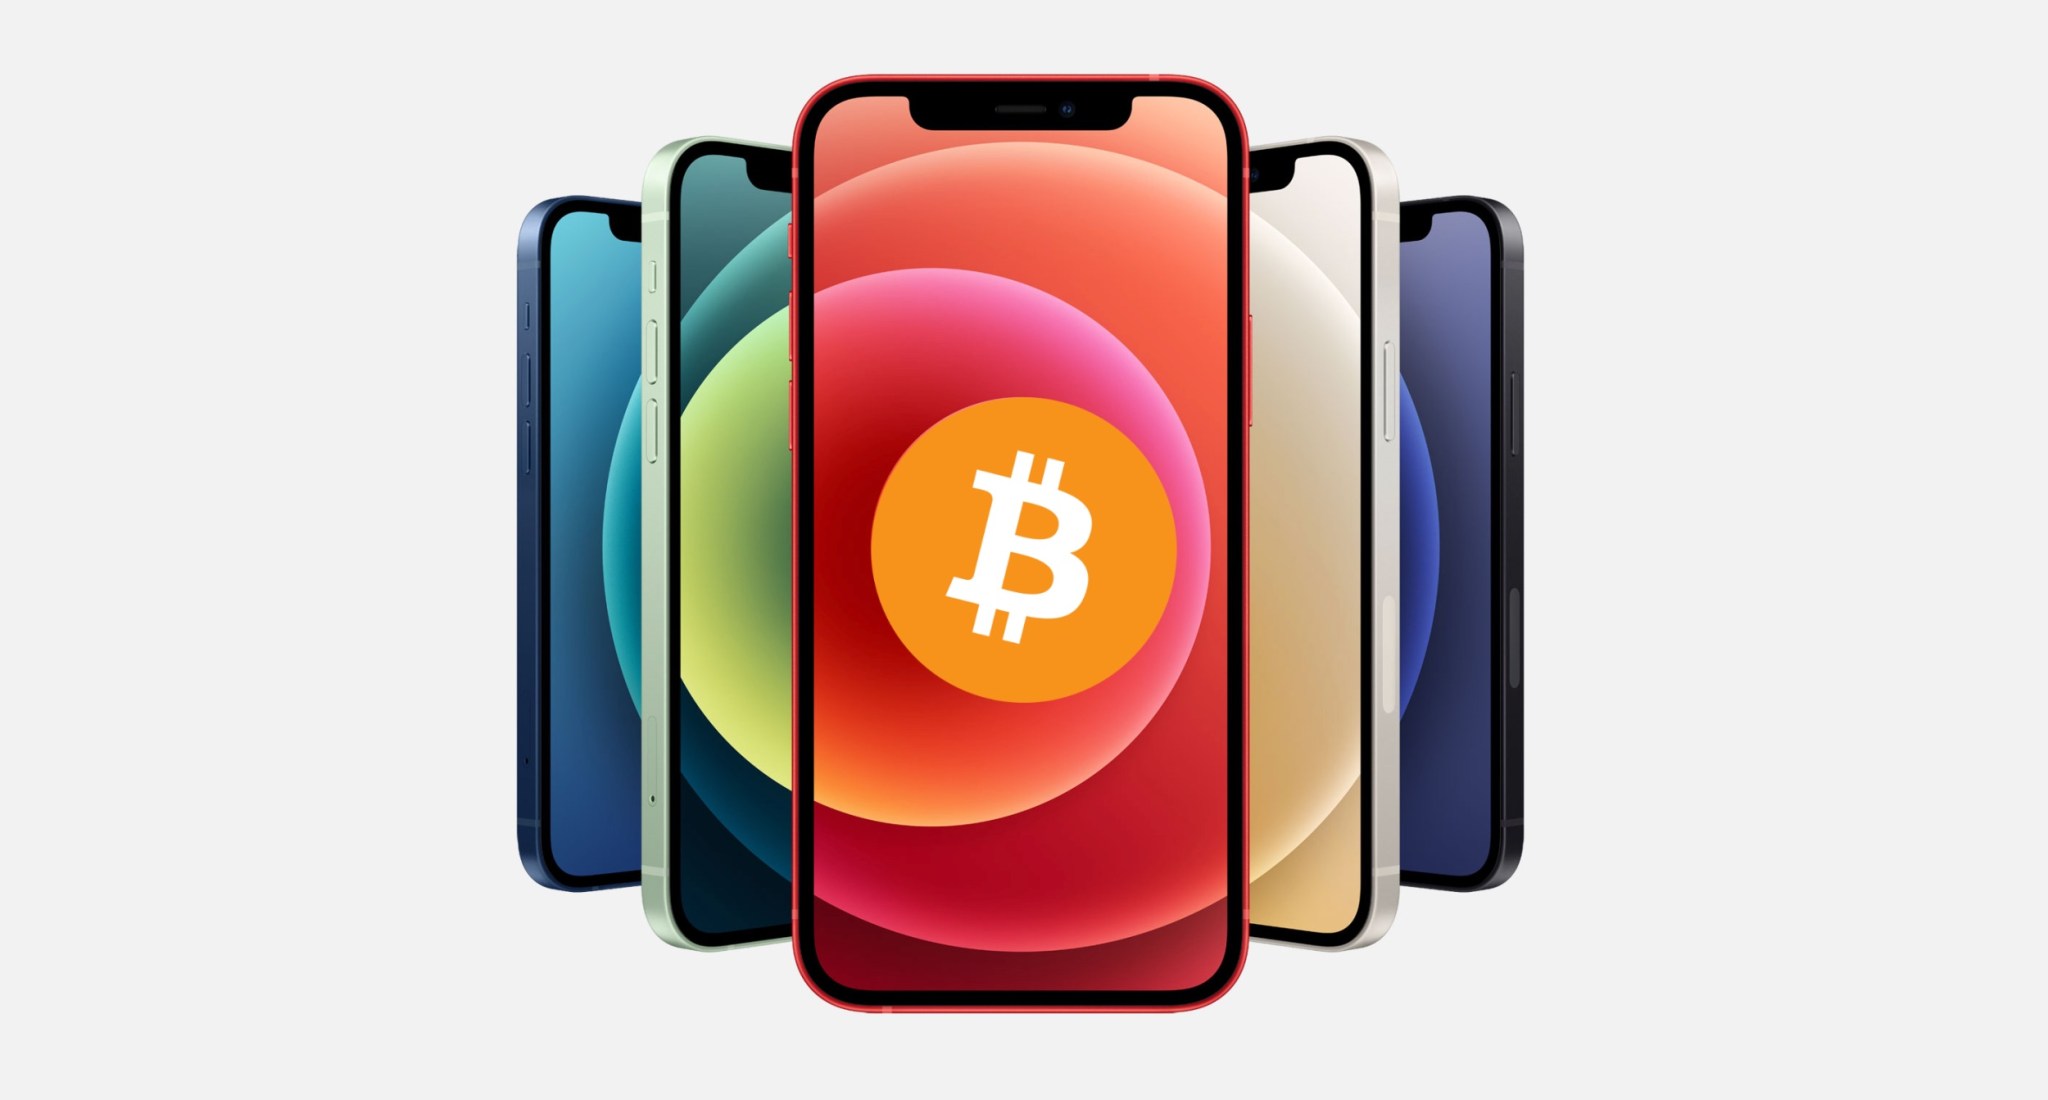 A few weeks ago, apple ceo tim cook made headlines when he said he personally owns cryptocurrency while mentioning that apple is looking at it from a technology perspective, but not from a treasury decision. What will apple do with bitcoin and cryptocurrency?